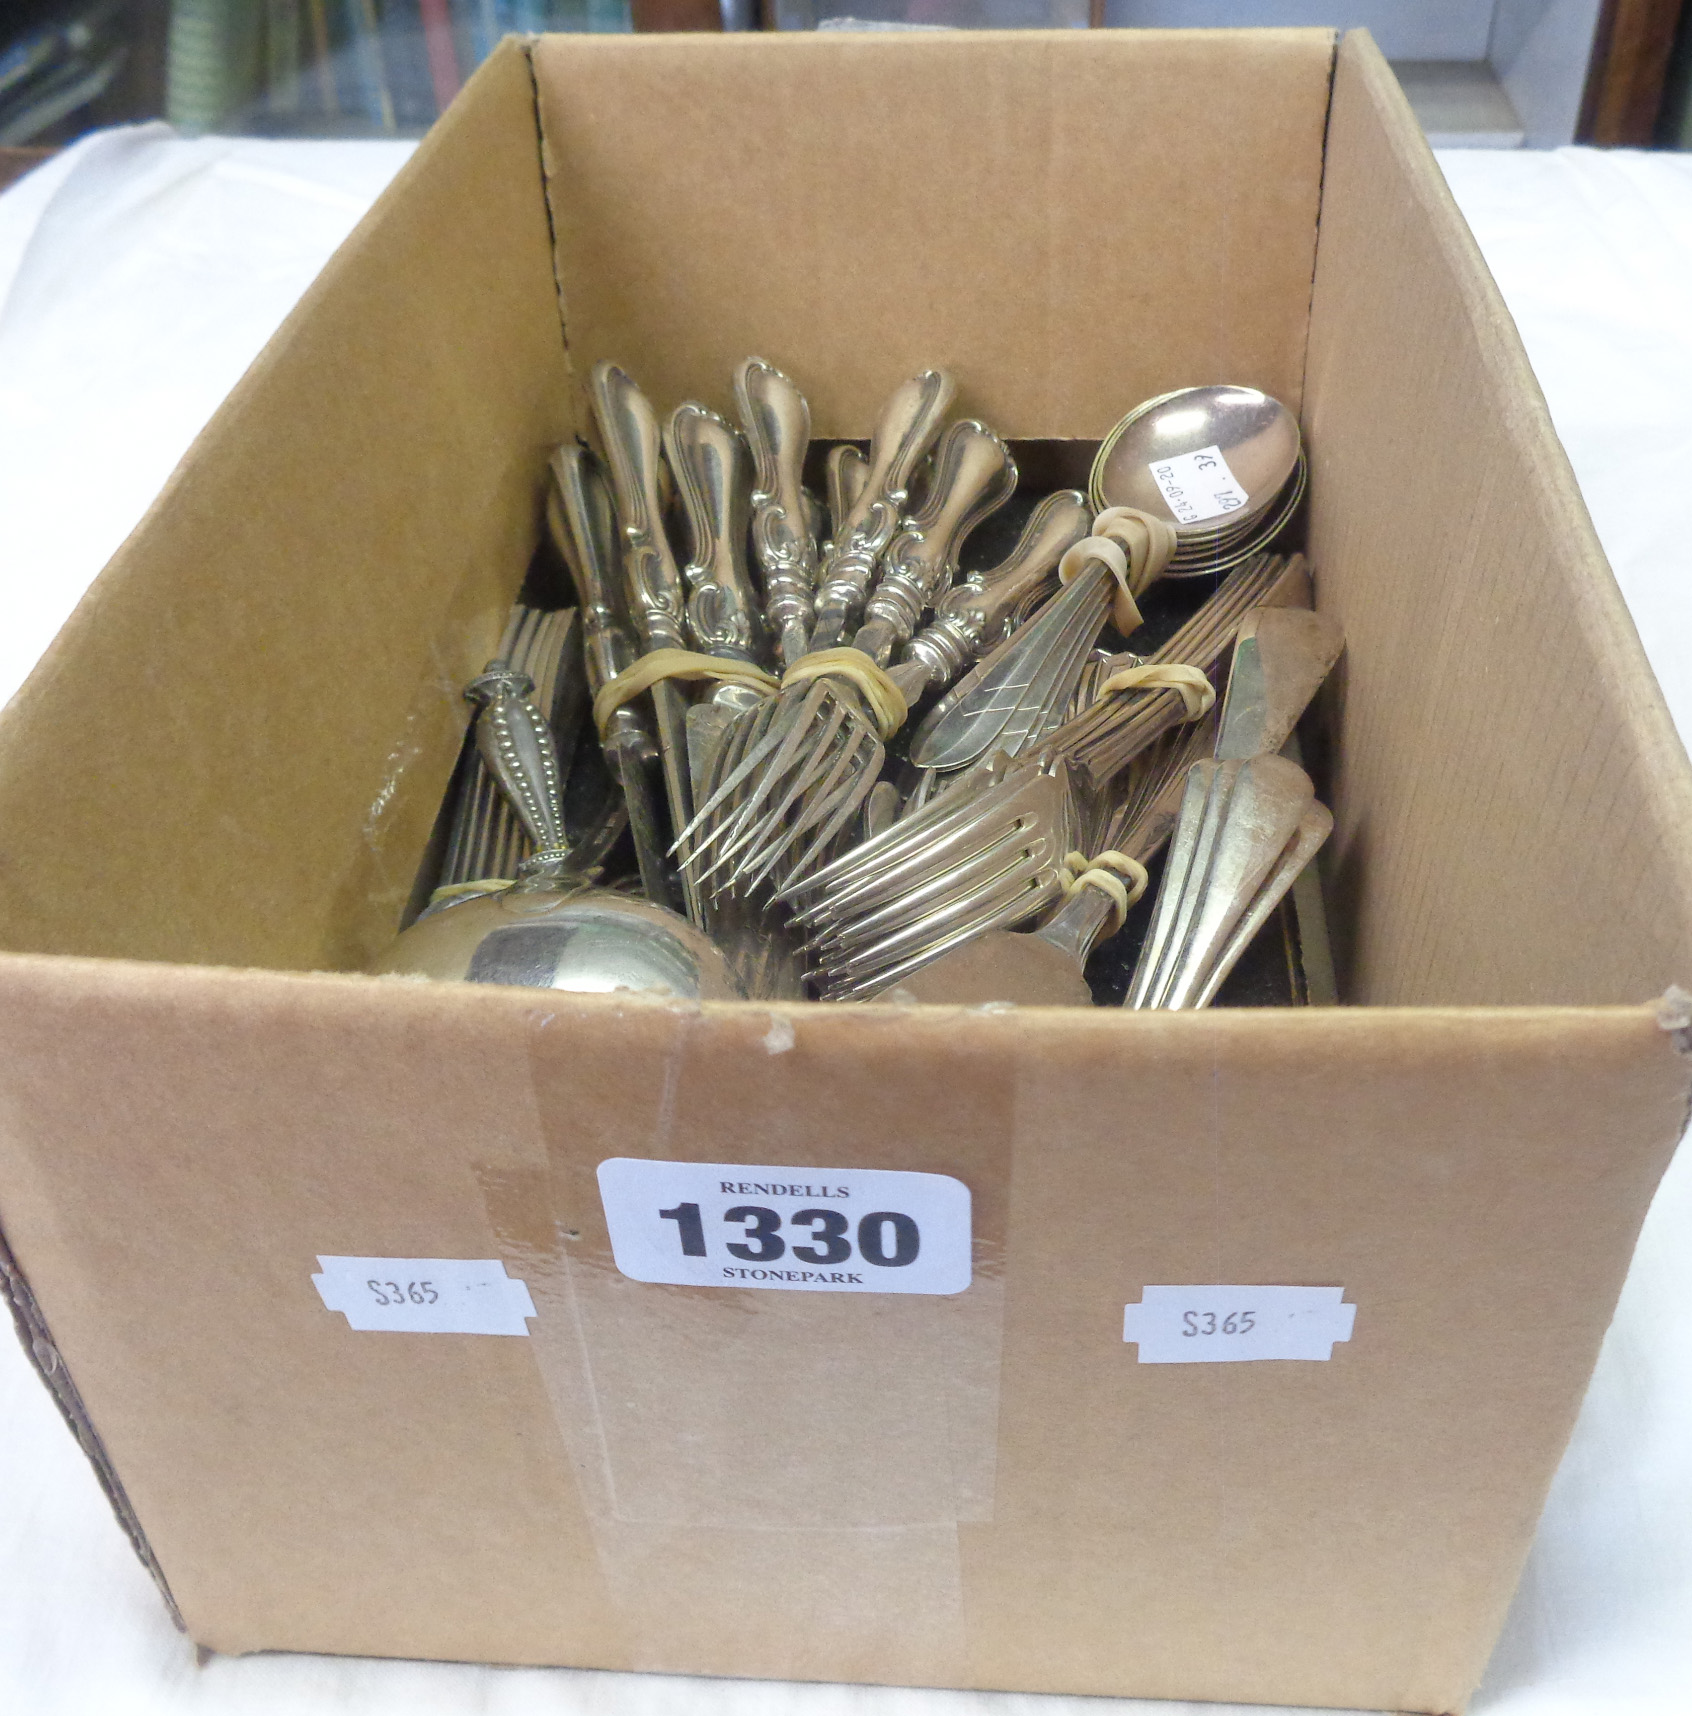 A quantity of silver plater cutlery, also a cased set of silver handled dessert knives - various